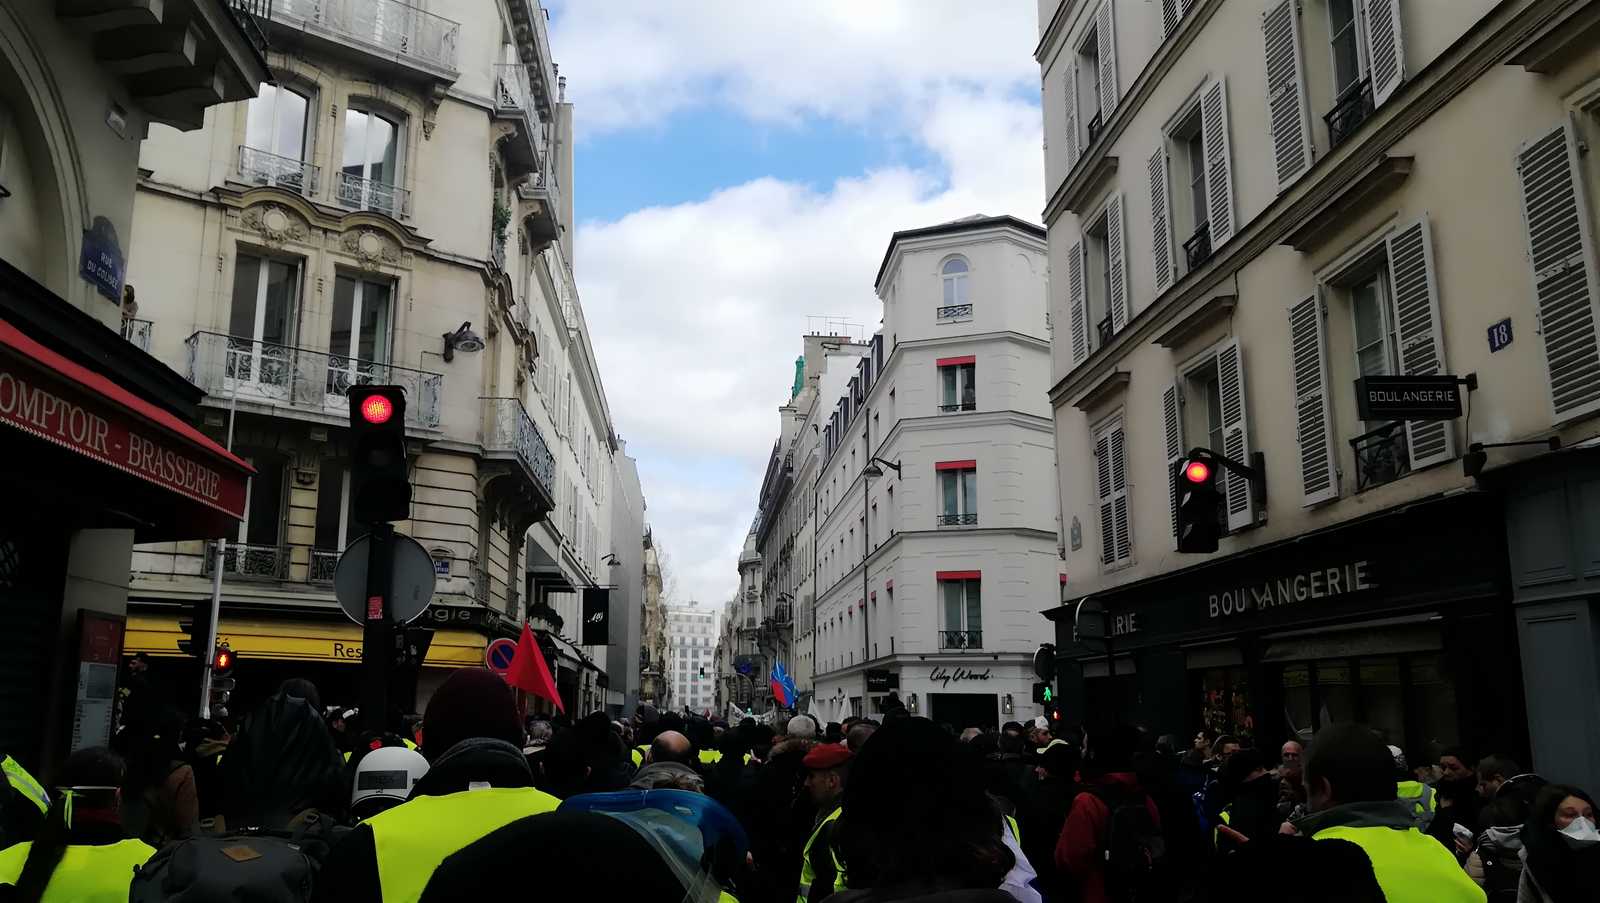 Protesters of the Gilets Jaunes movement are walking in a street of Paris.